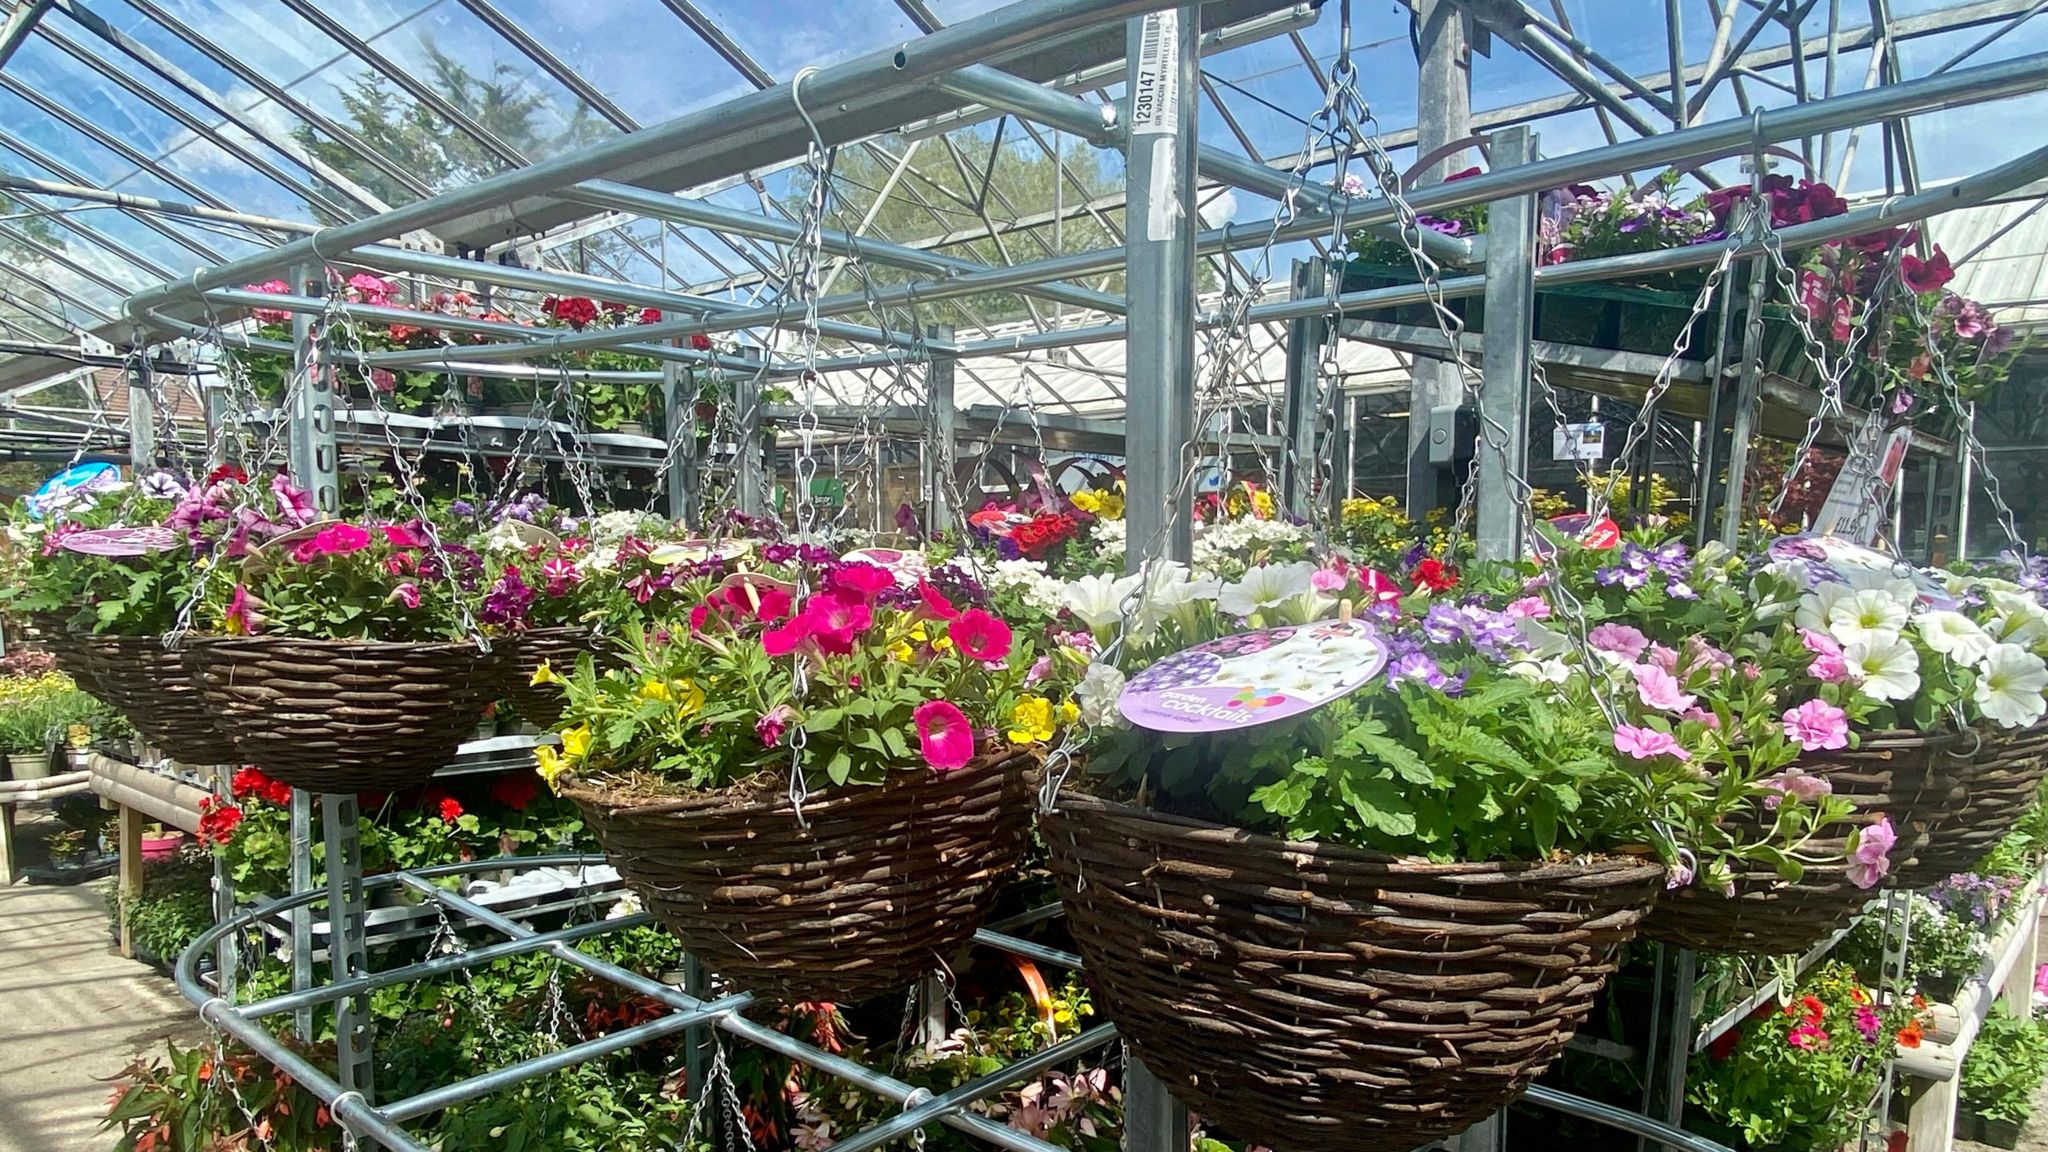 Hanging baskets filled with flowers